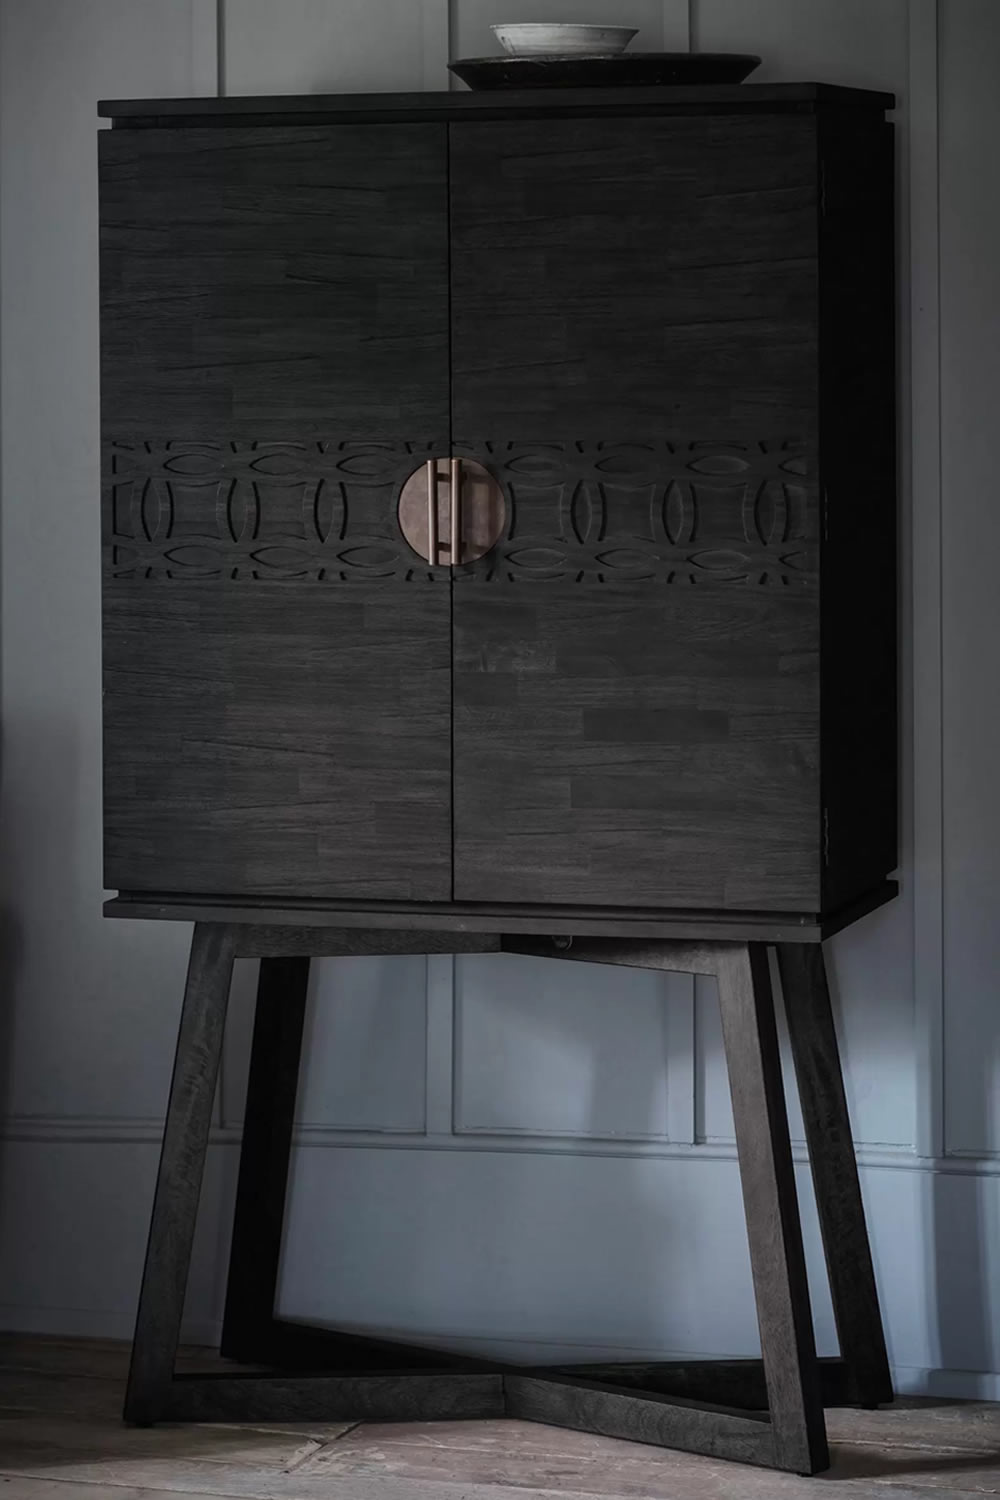 View Boho Black Wooden Dining Room Cocktail Cabinet Crafted From Mango Wood Timber Veneers MDF 2 Storage Shelves Glass Mirrored Back Fretwork Do information